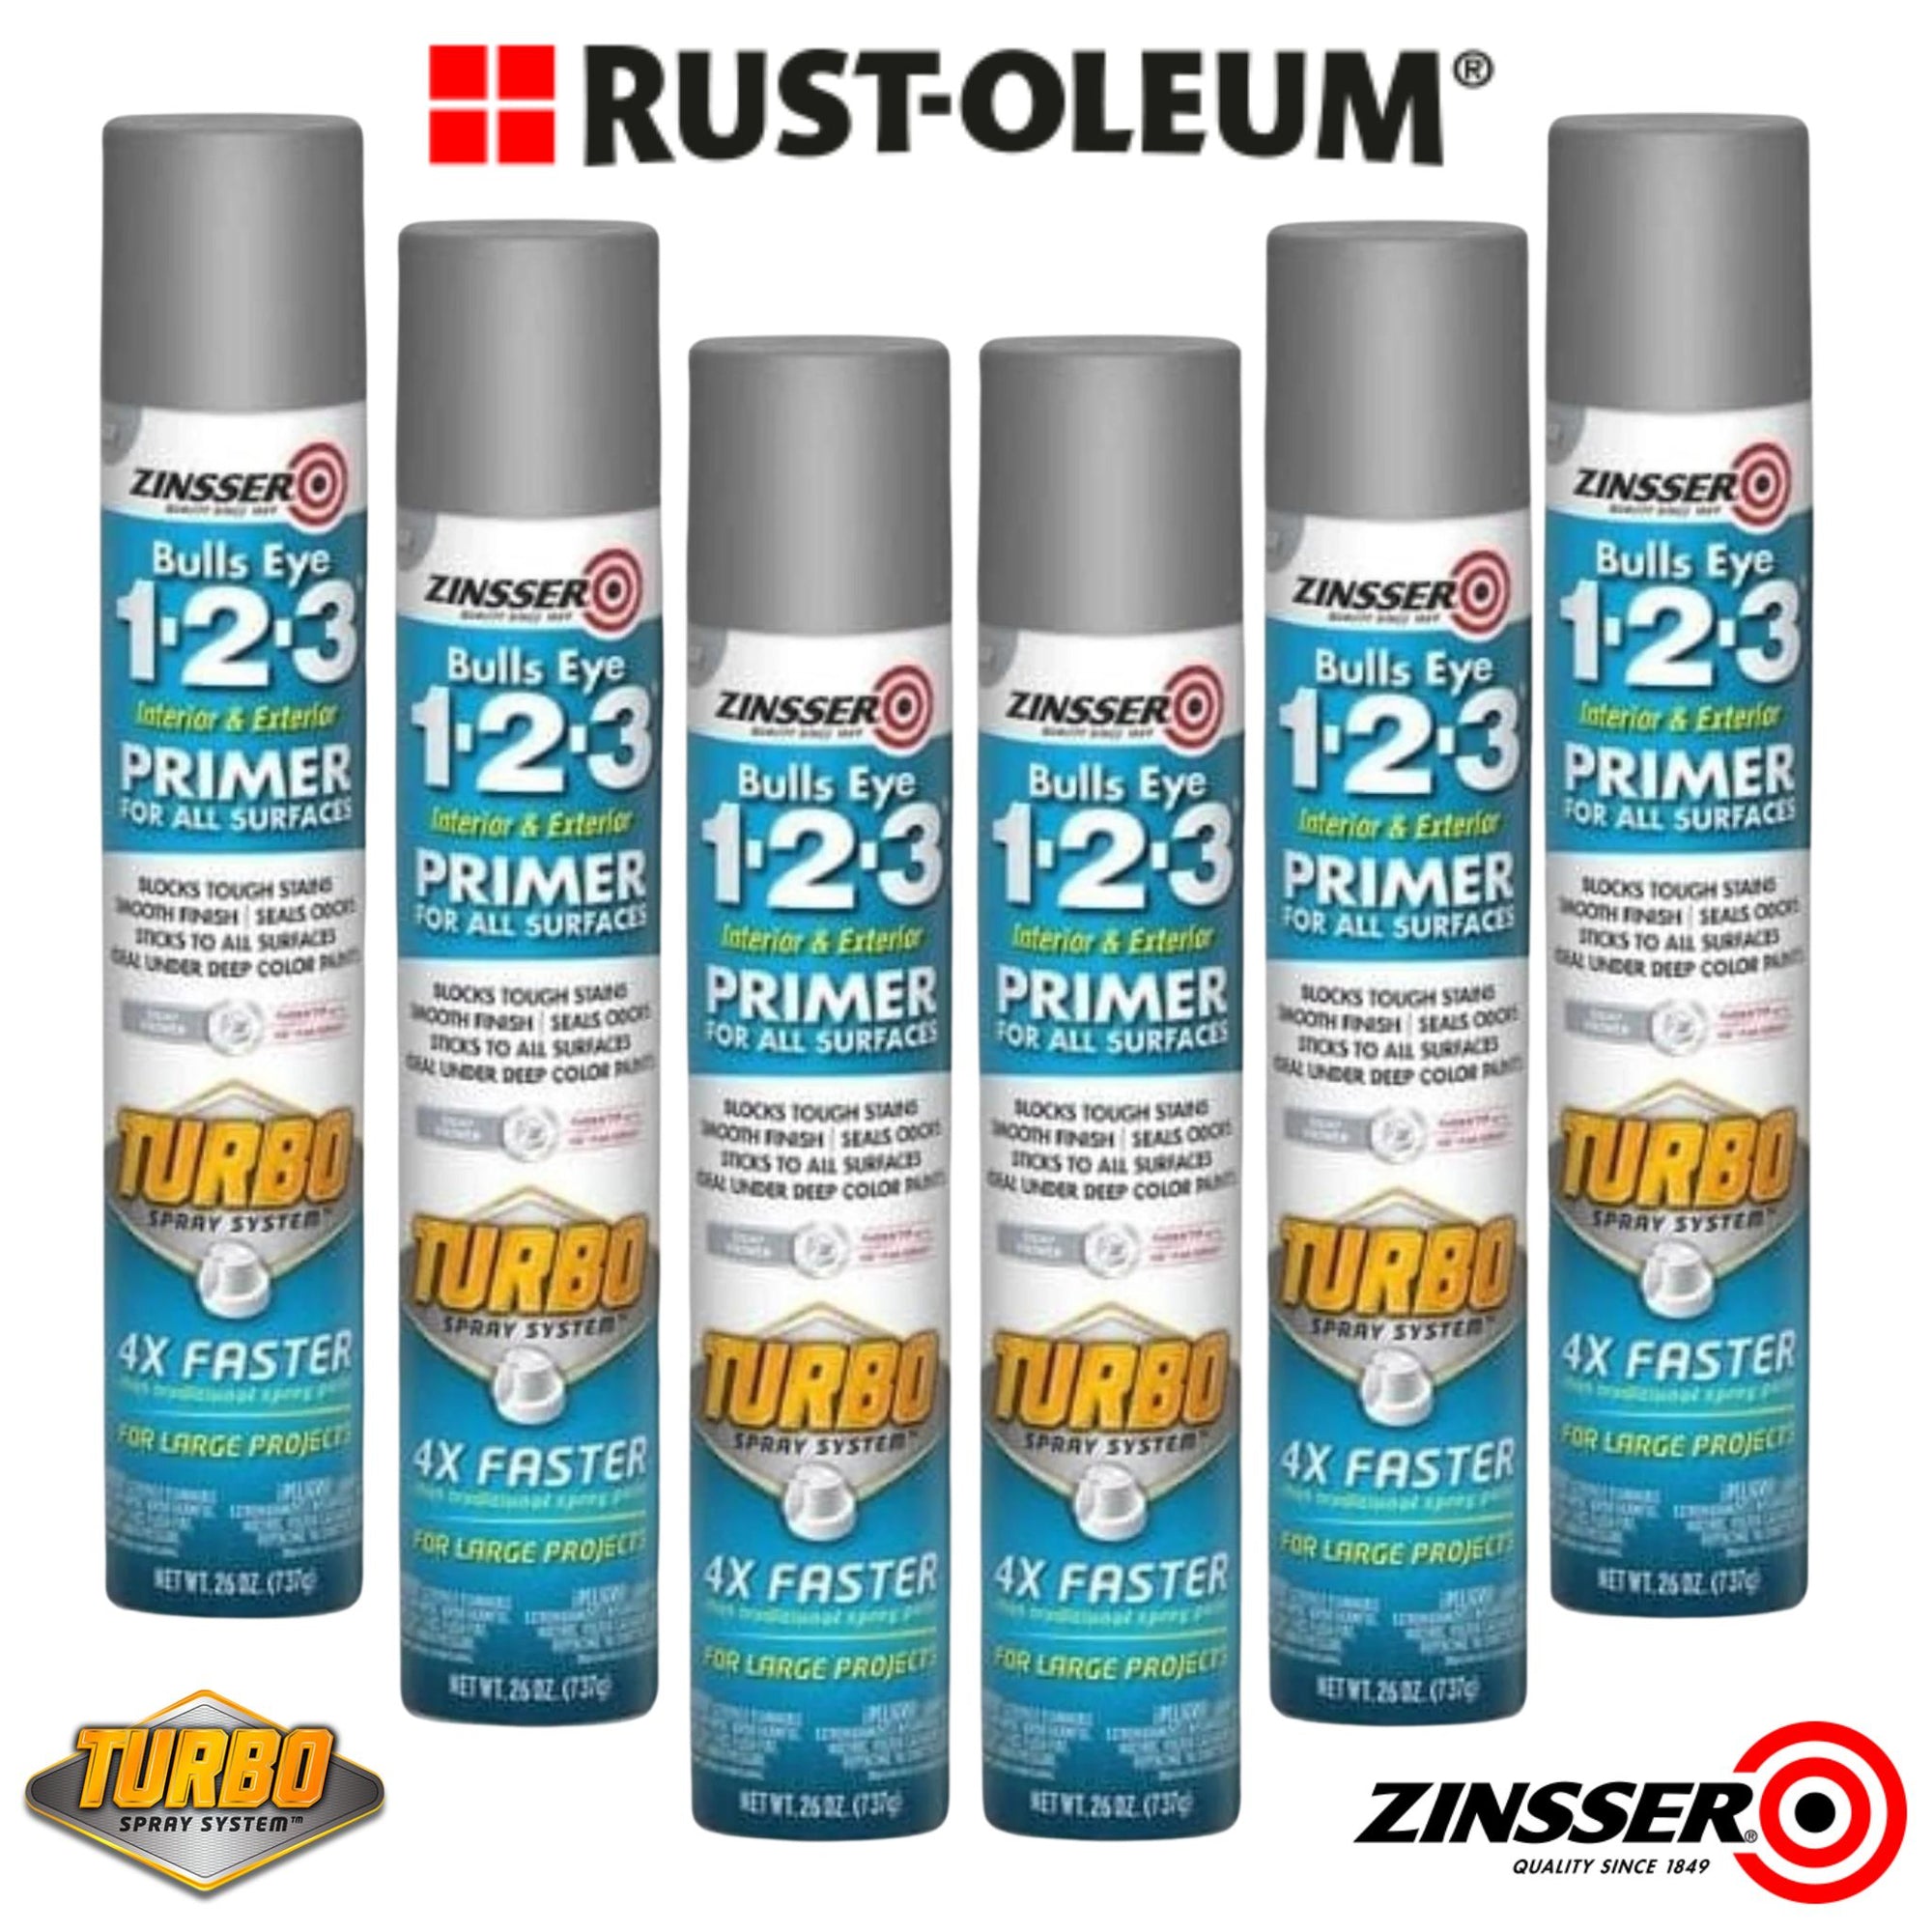 Zinsser Bulls Eye 1-2-3 Primer With Turbo Spray System | 738grams - South East Clearance Centre